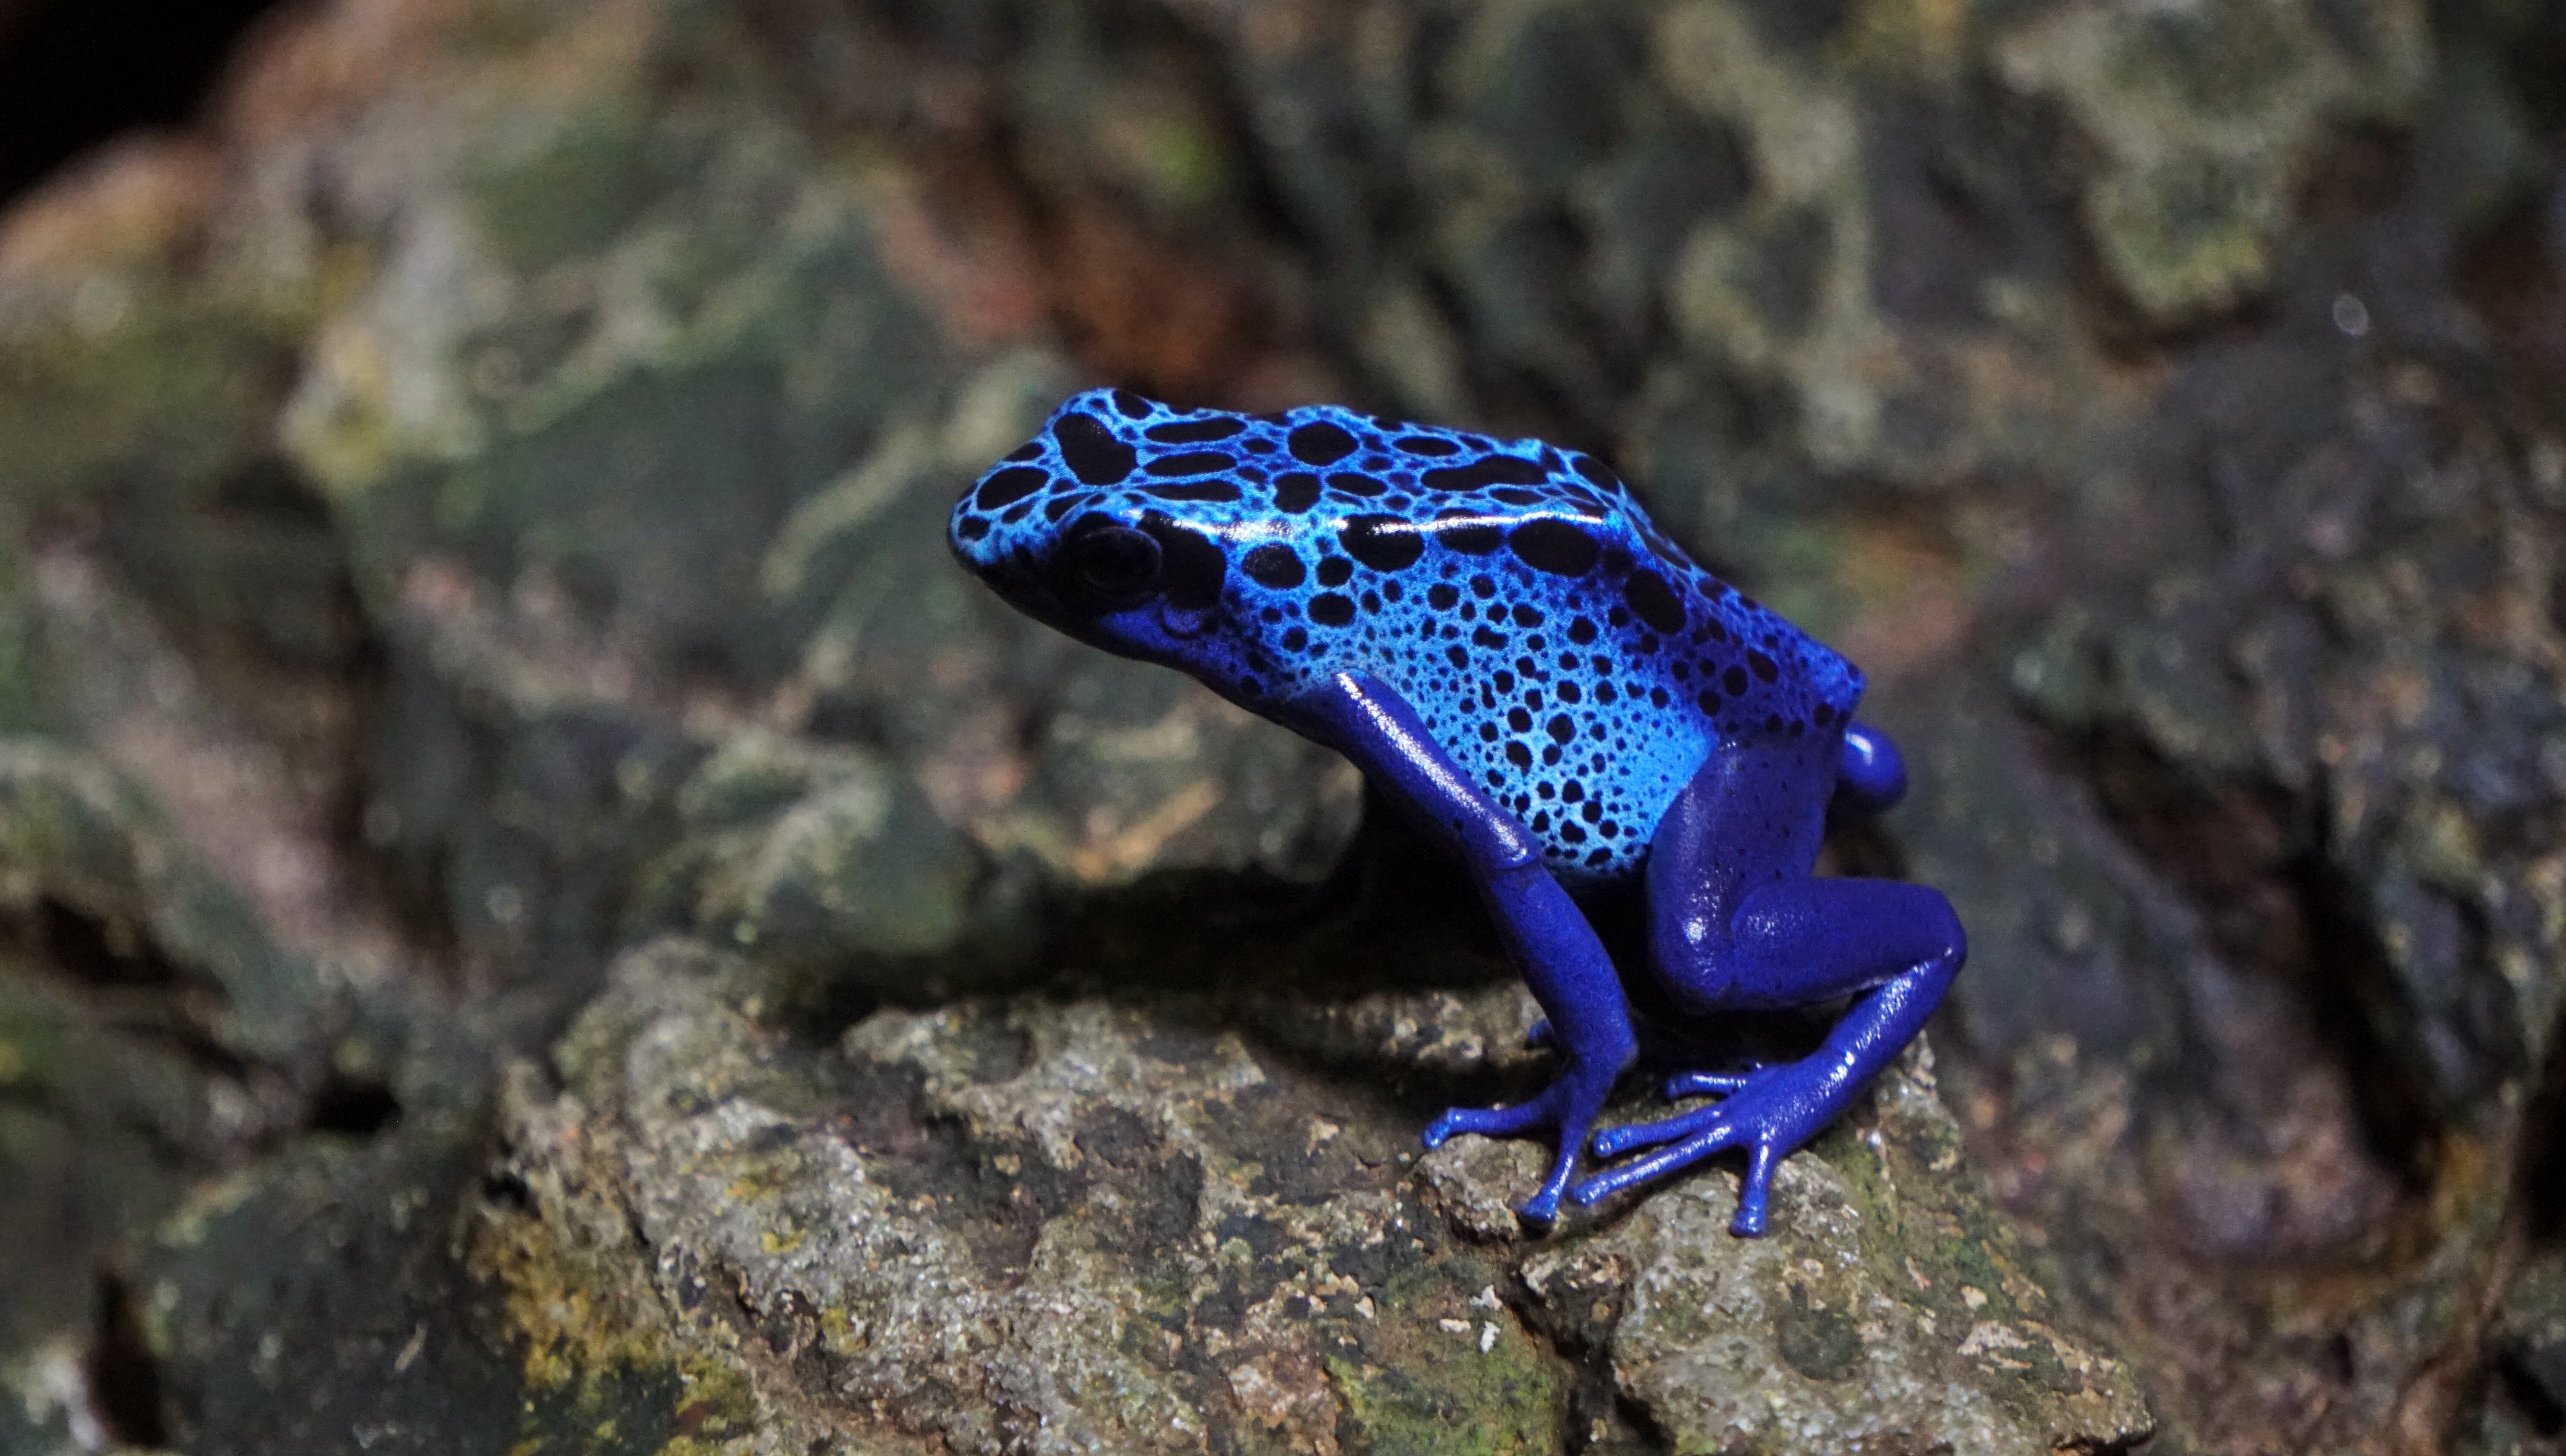 In Arboretum in Kudypy you can see “Blue Frogs”